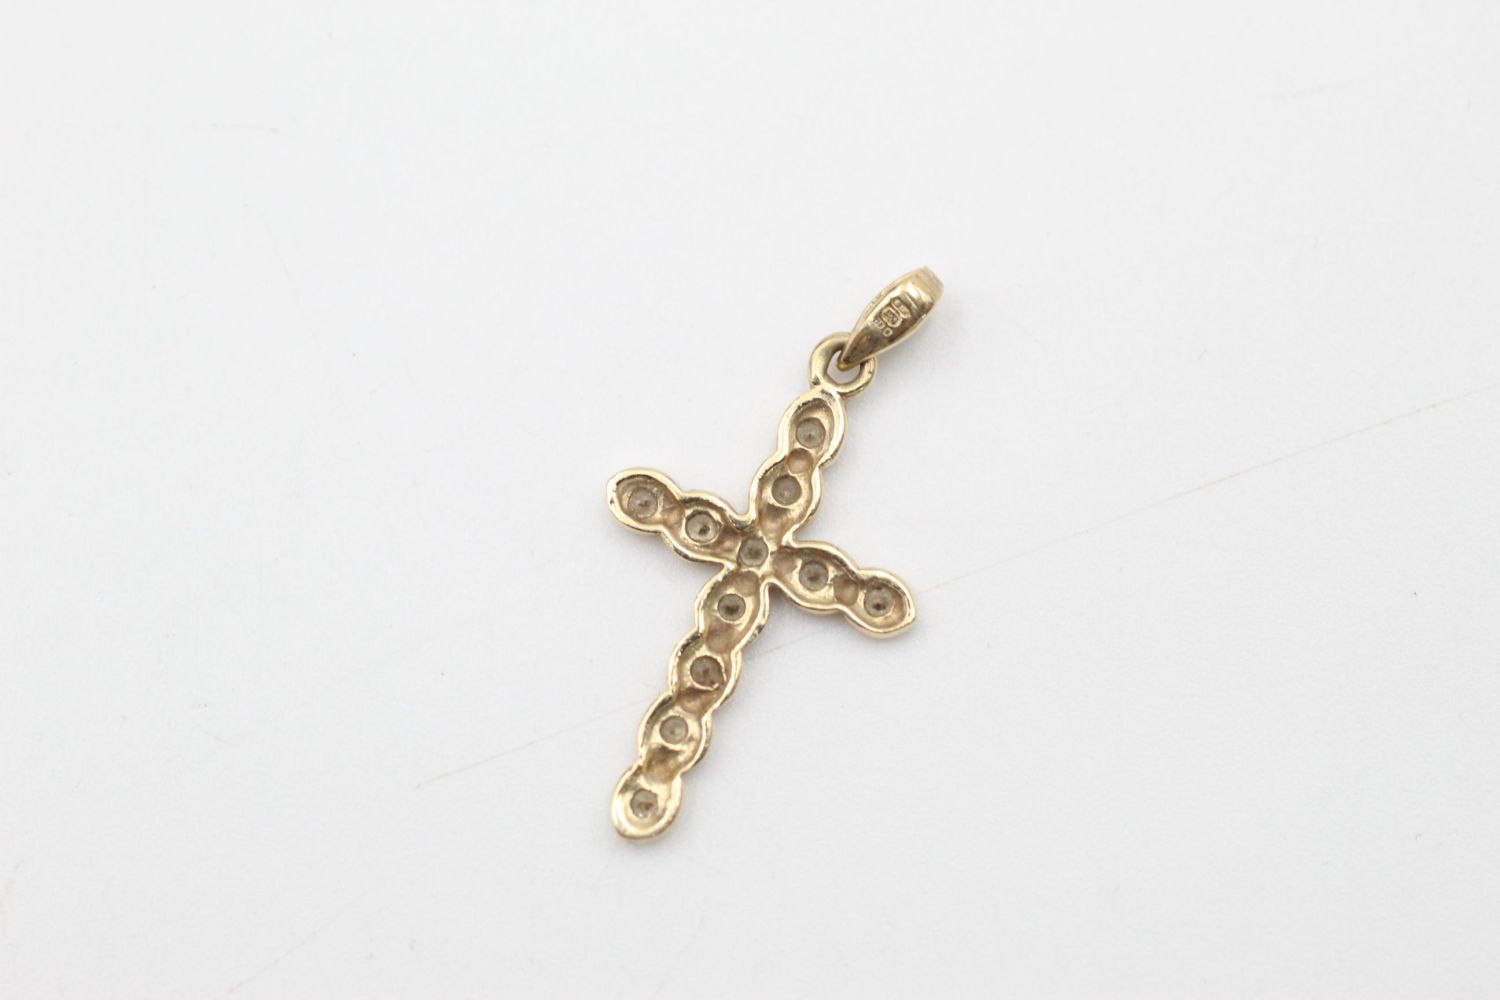 3 x 9ct Gold gemstone detail jewellery inc. cross, pendant, necklace 3 grams gross - Image 3 of 11